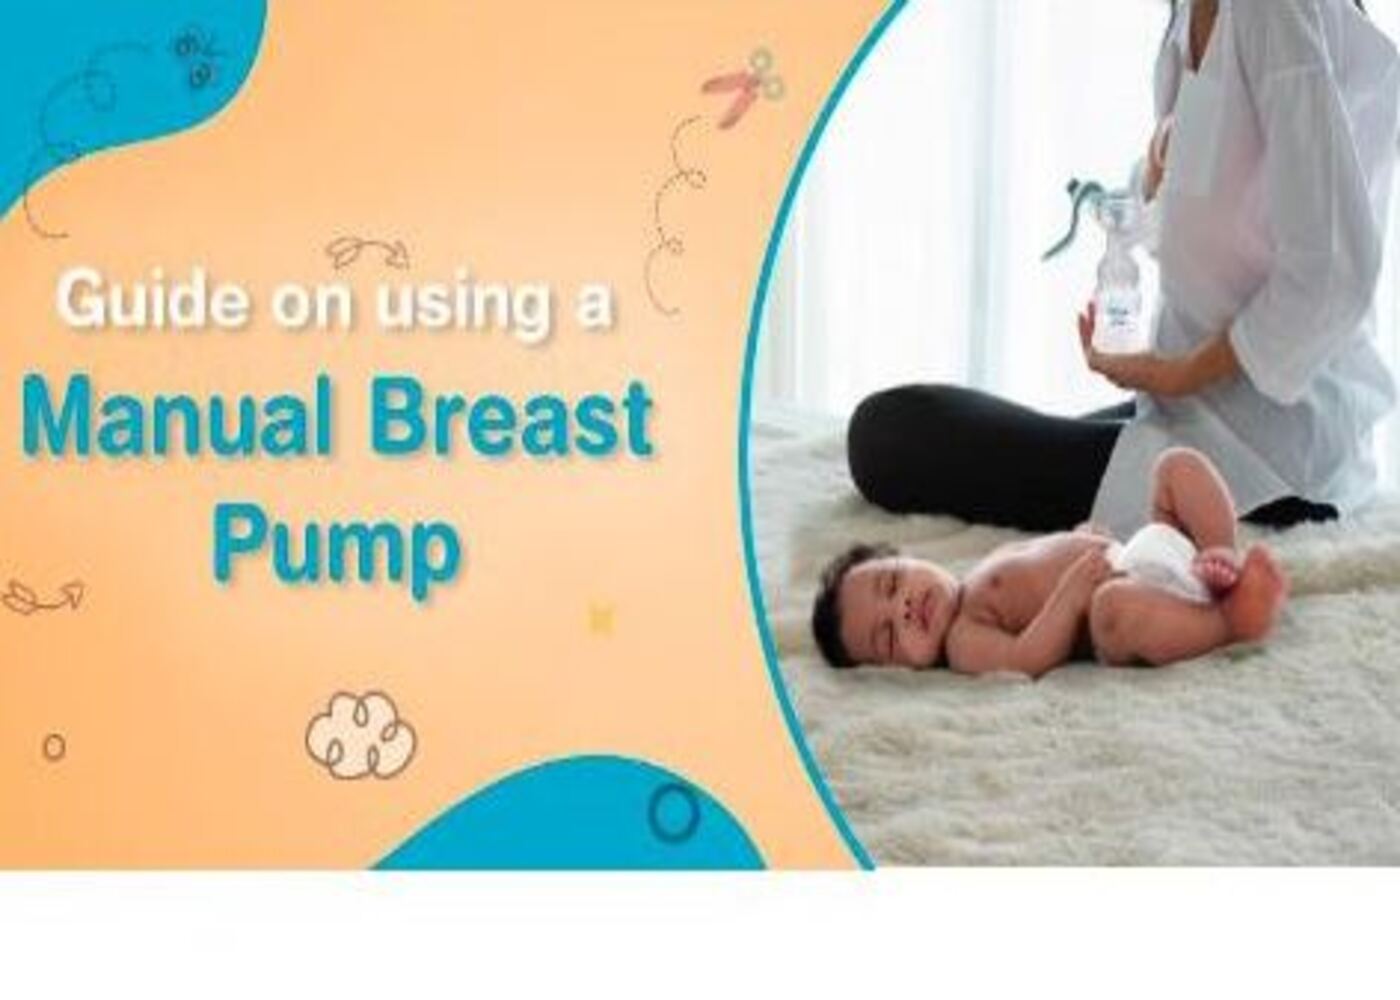 Learning About using a Manual Breast Pump